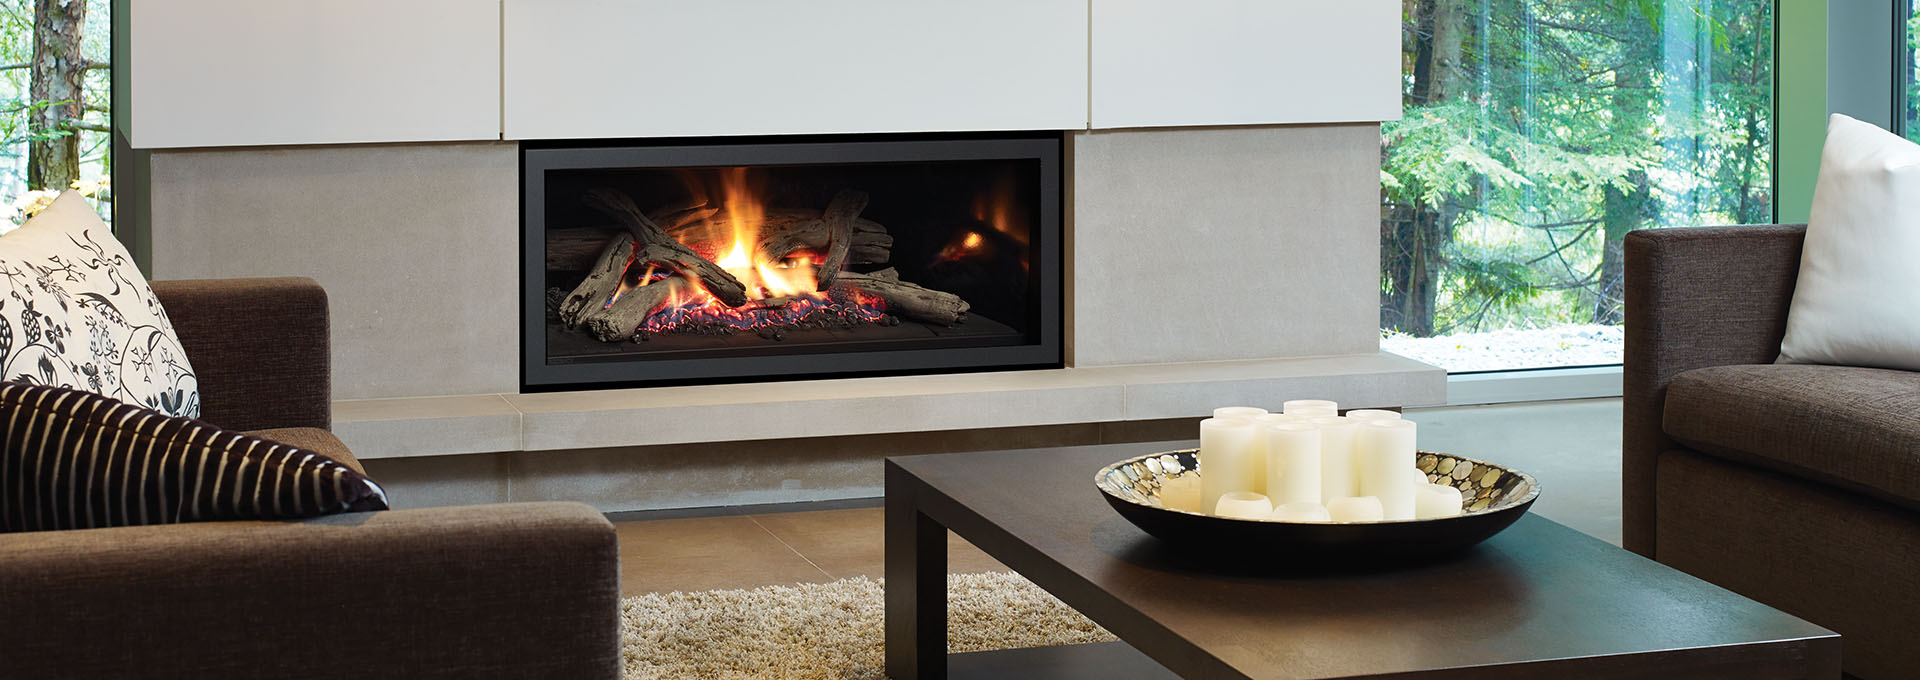 Contemporary Gas Fireplaces Linear Gas Fireplaces From Regency